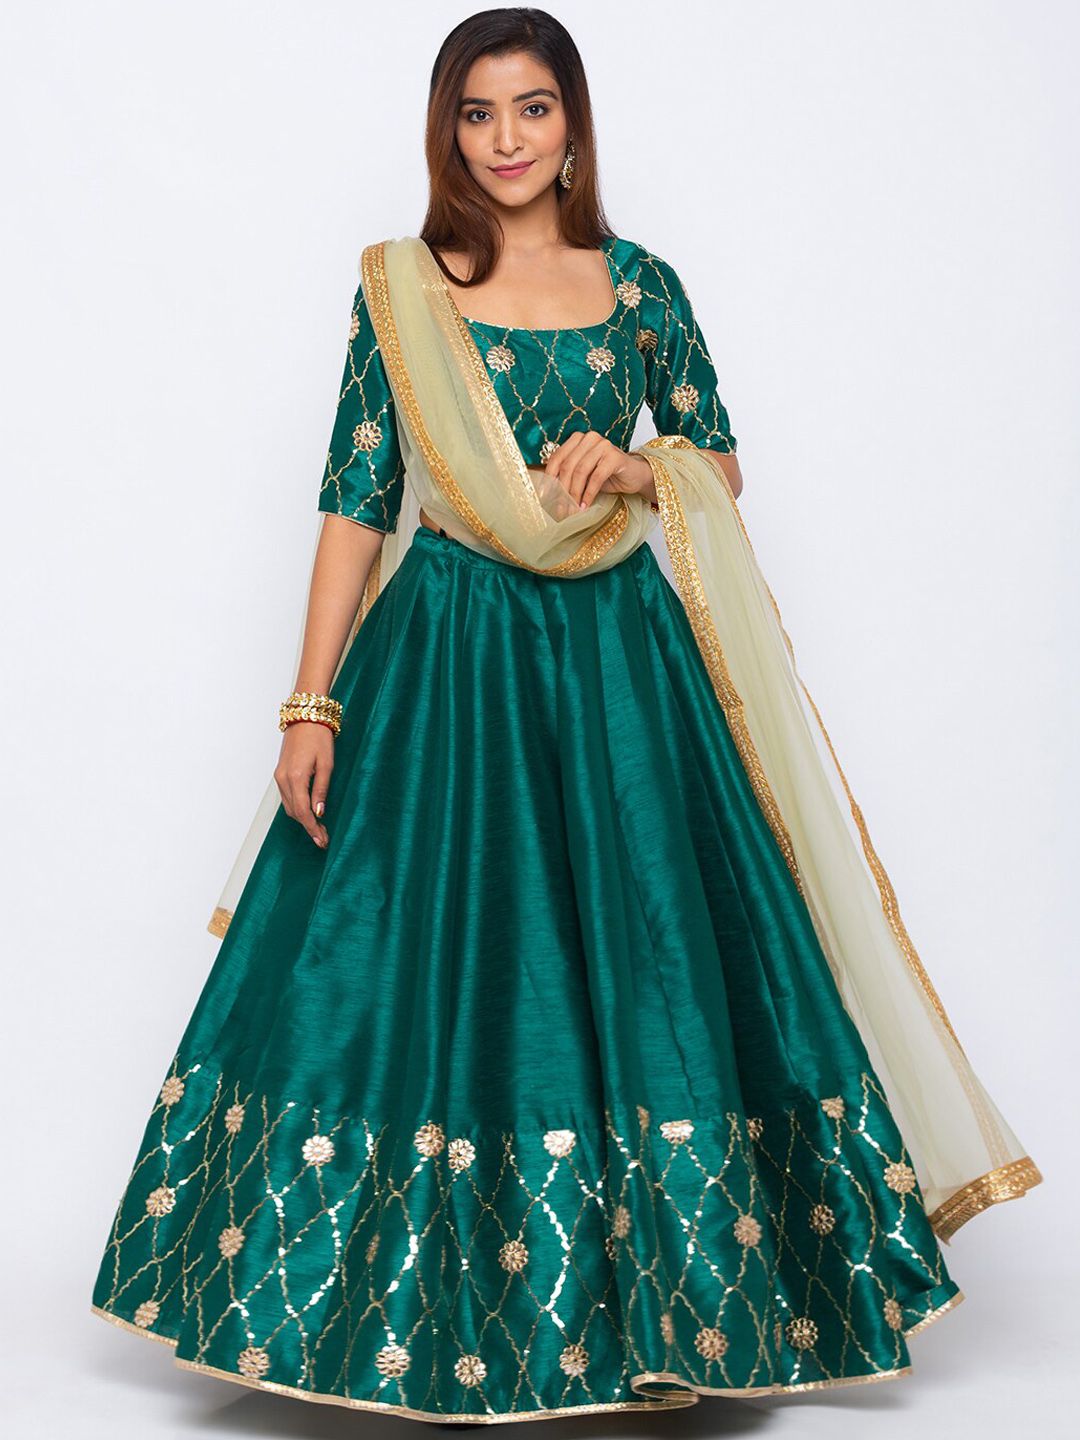 6Y COLLECTIVE Teal & Gold-Toned Semi-stitched Lehenga-unstitched blouse & dupatta Price in India